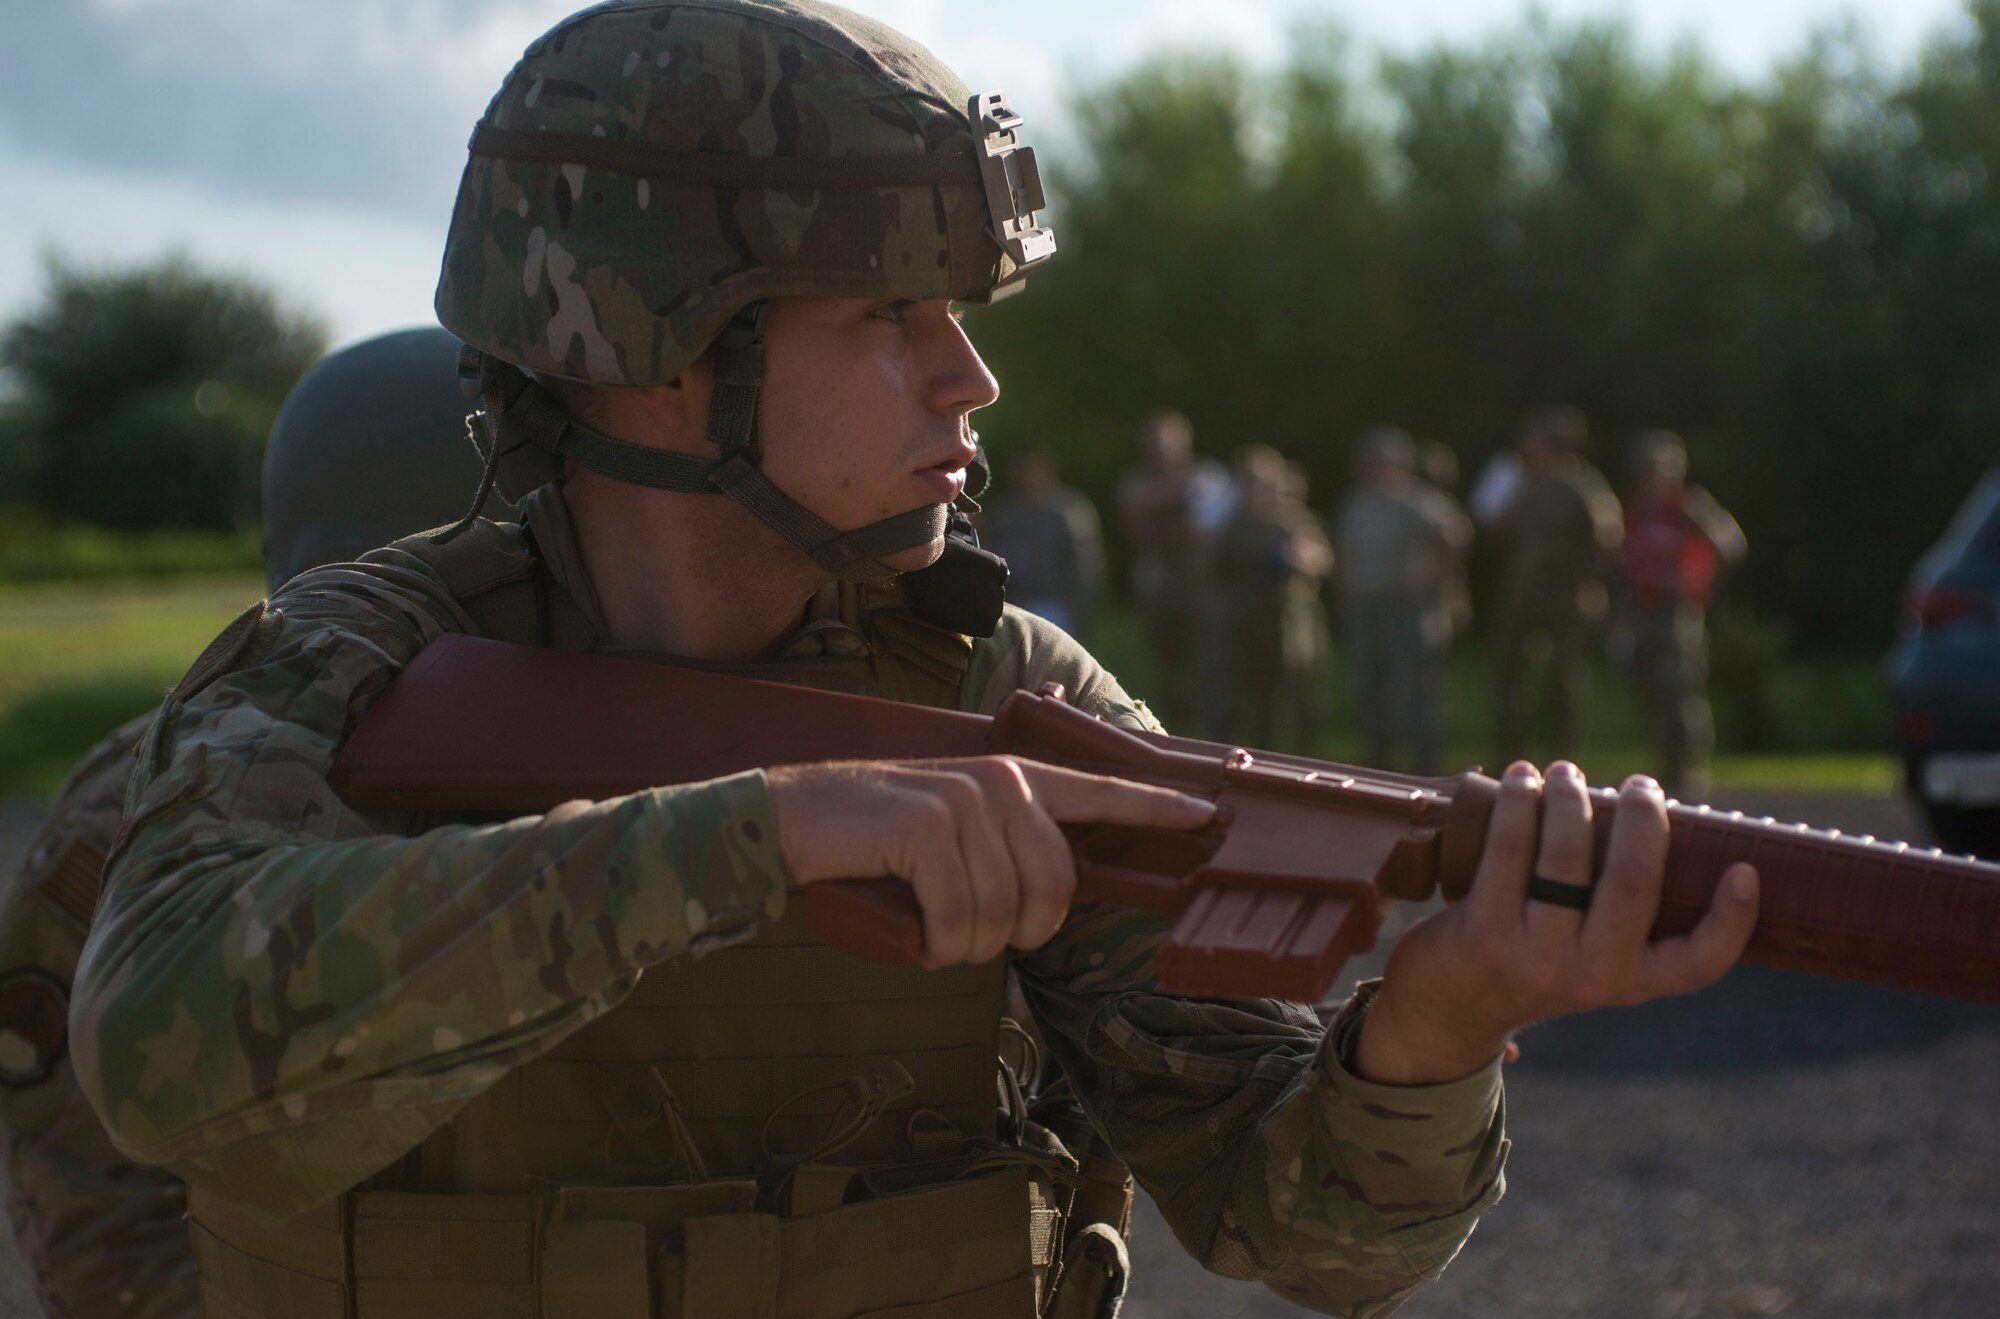 U.S. Air Force Senior Airman Weston Super, a 6th Security Forces Squadron entry controller, readies his training weapon during an active shooter exercise at MacDill Air Force Base, Fla., Aug. 8, 2019.